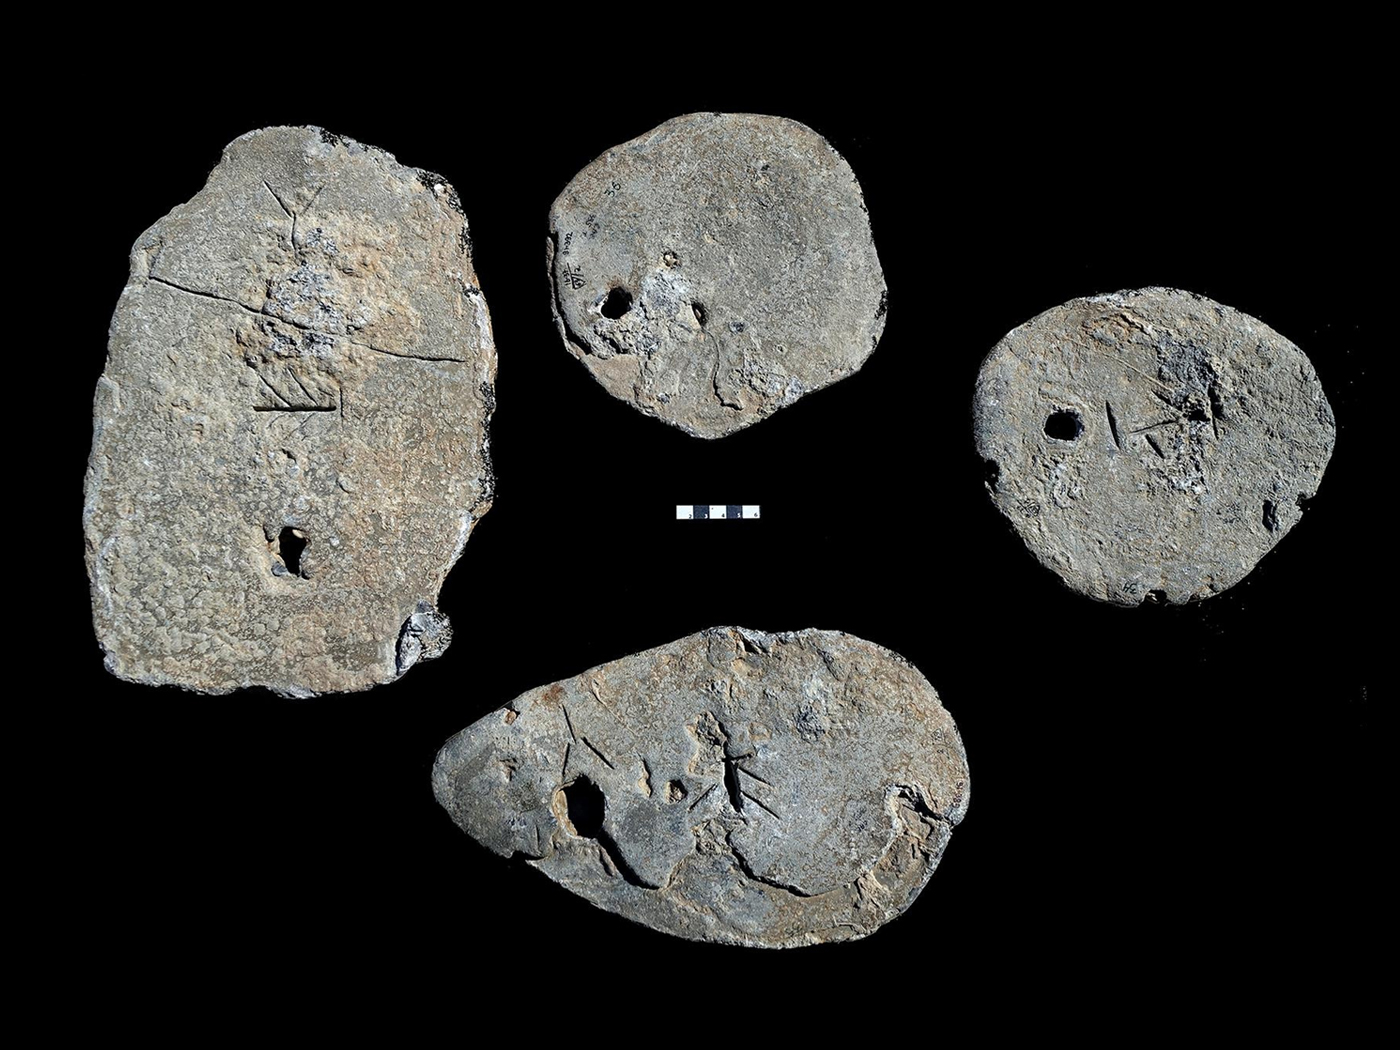 Four lead ingots found in a shipwreck off the coast of Israel feature Cypro-Minoan markings but actually originated in Sardinia. Ehud Galili / University of Haifa’s Institute for Maritime Studies